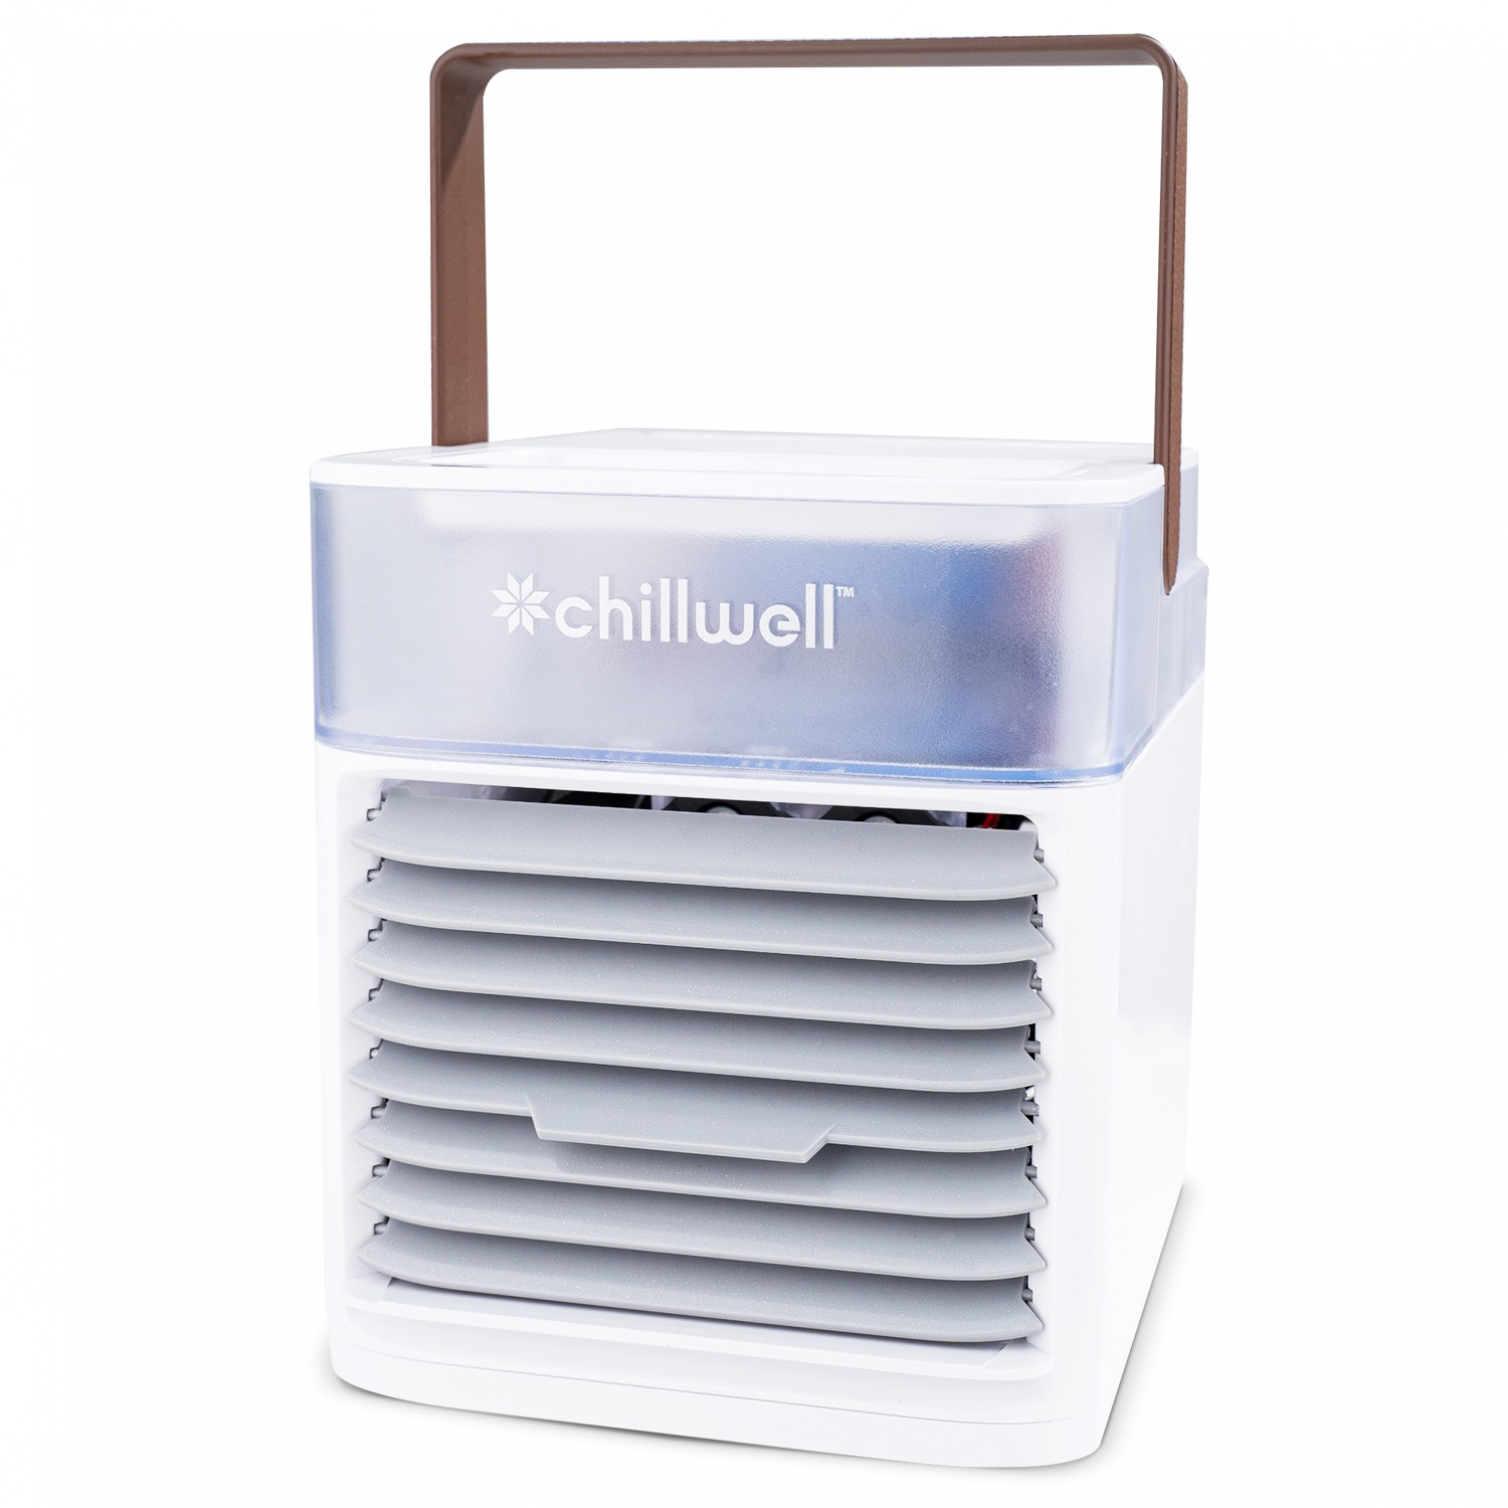 Chillwell AC Personal Air Cooler Review